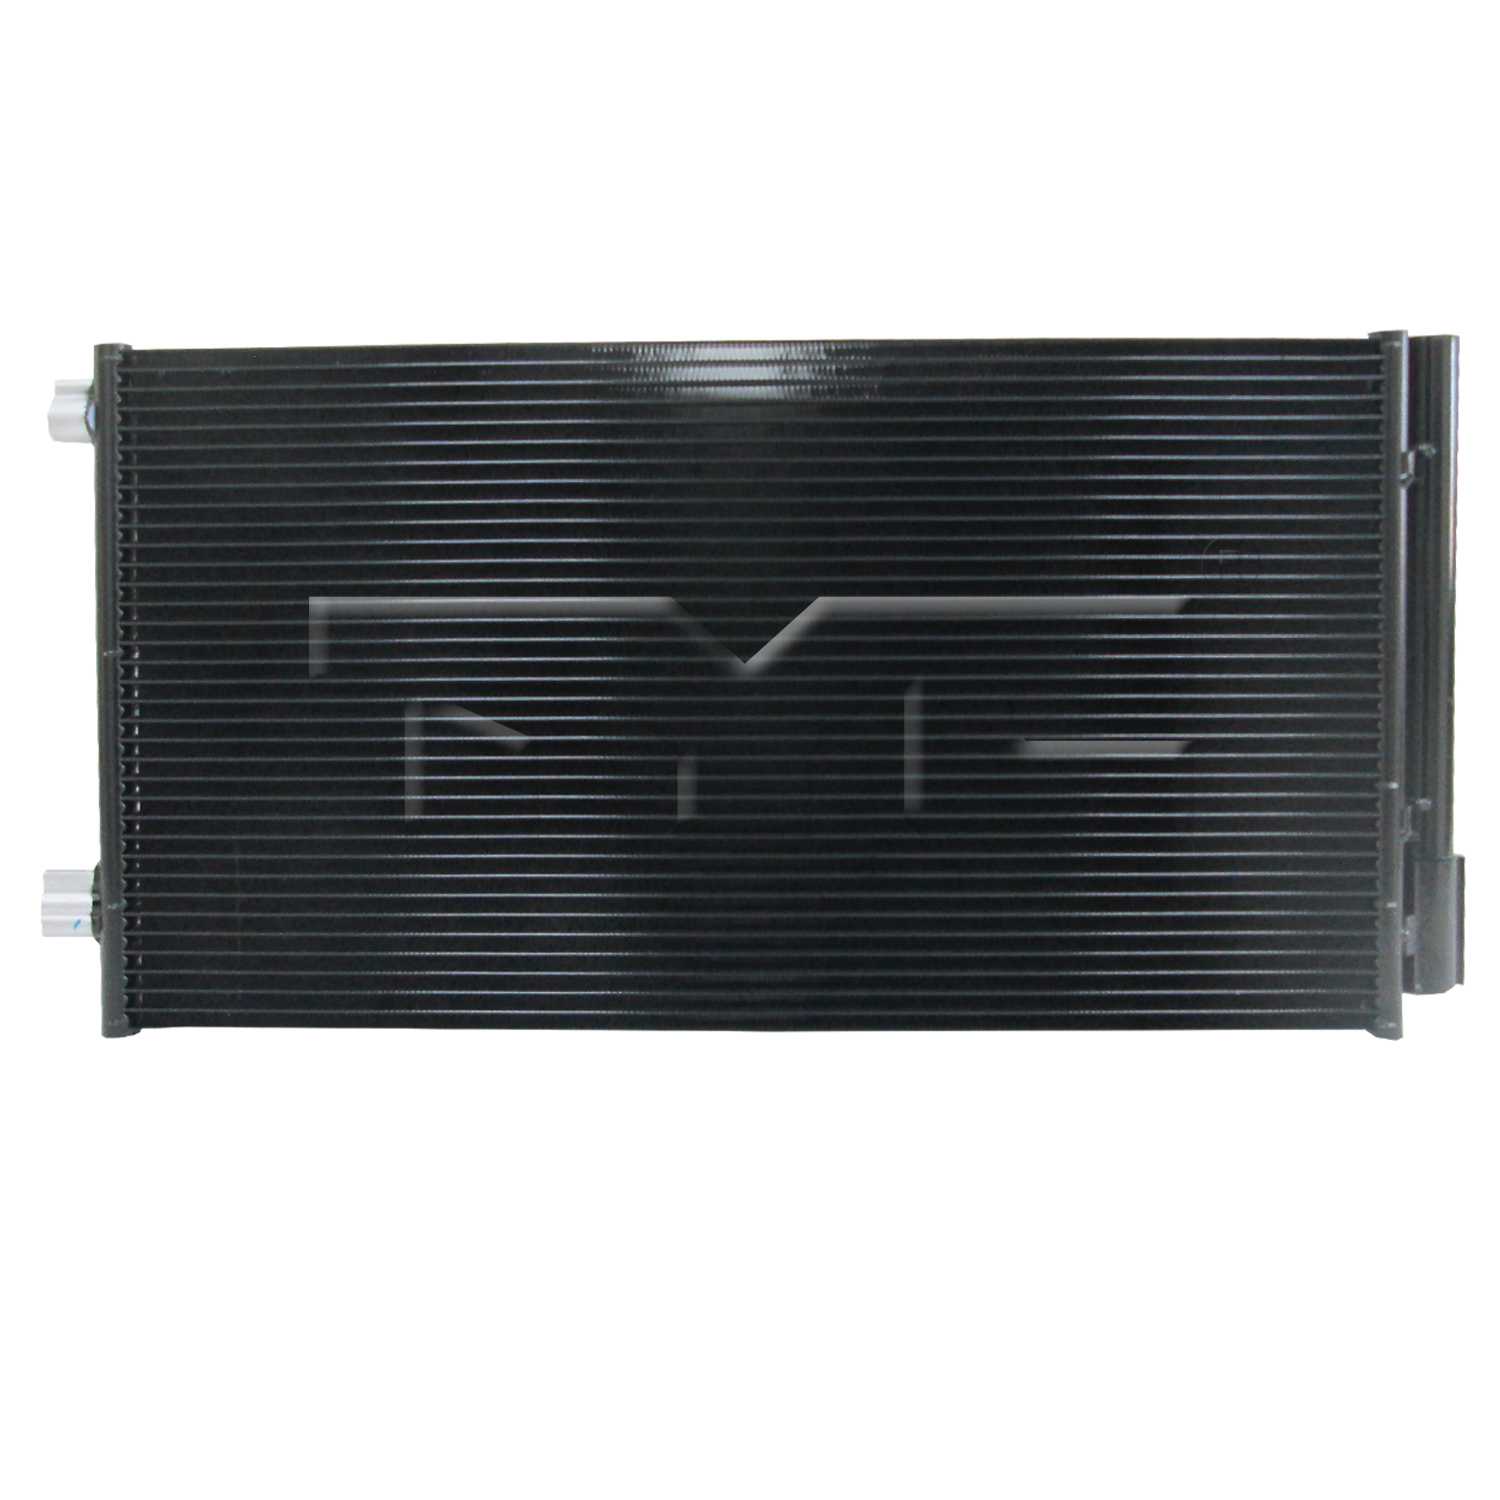 Aftermarket AC CONDENSERS for JEEP - COMPASS, COMPASS,17-22,Air conditioning condenser